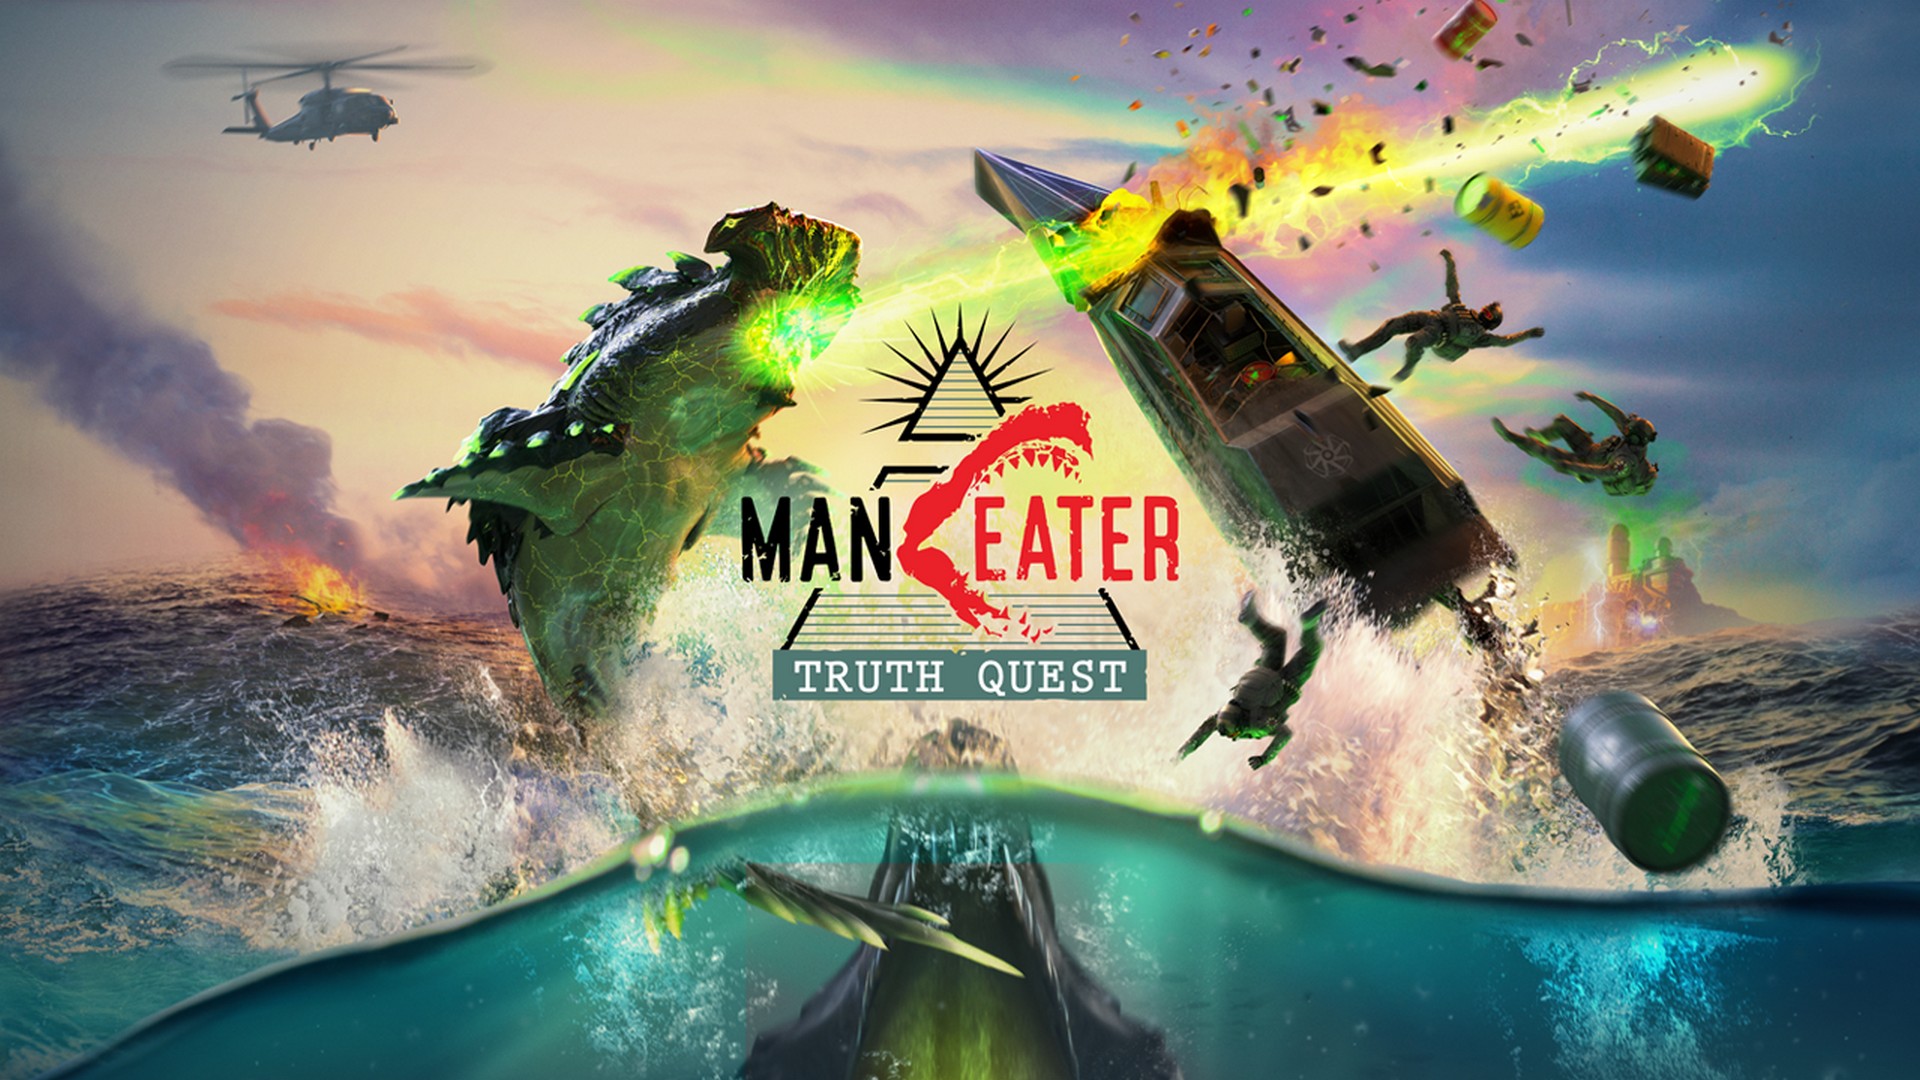 Maneater: Truth Quest Exposes Dark Conspiracies, Coming This Summer To Gaming Platforms Near You